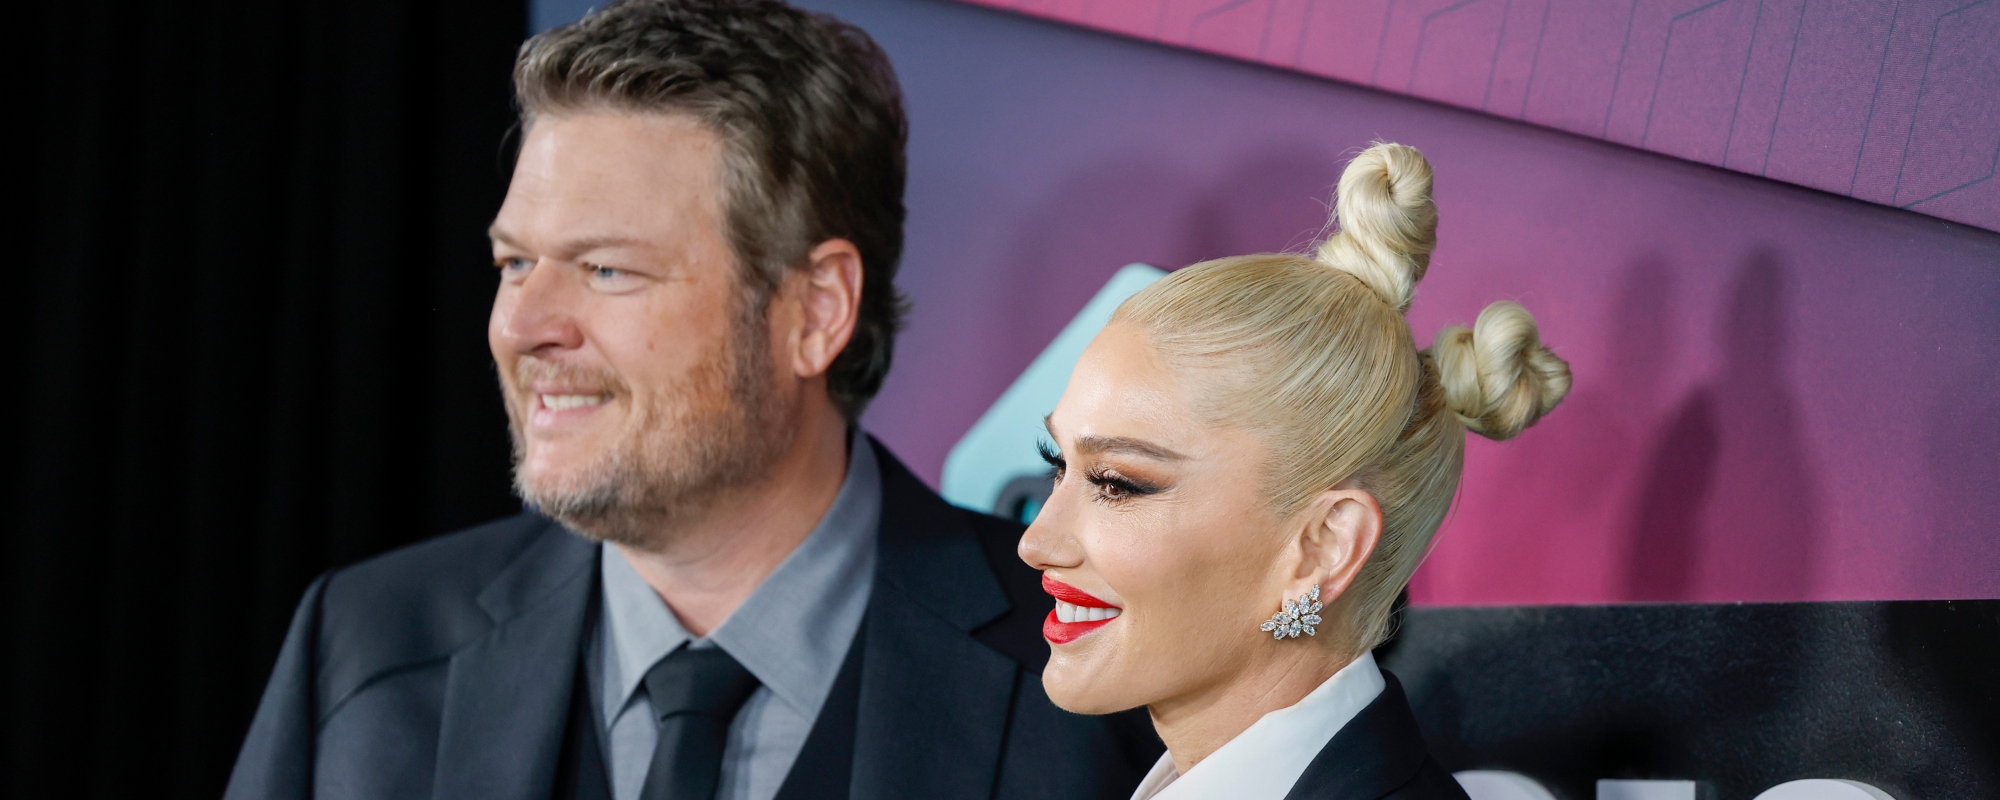 Gwen Stefani Reveals Super Bowl Sunday Plans With Husband Blake Shelton: “Why Are We Even Having This Conversation?”